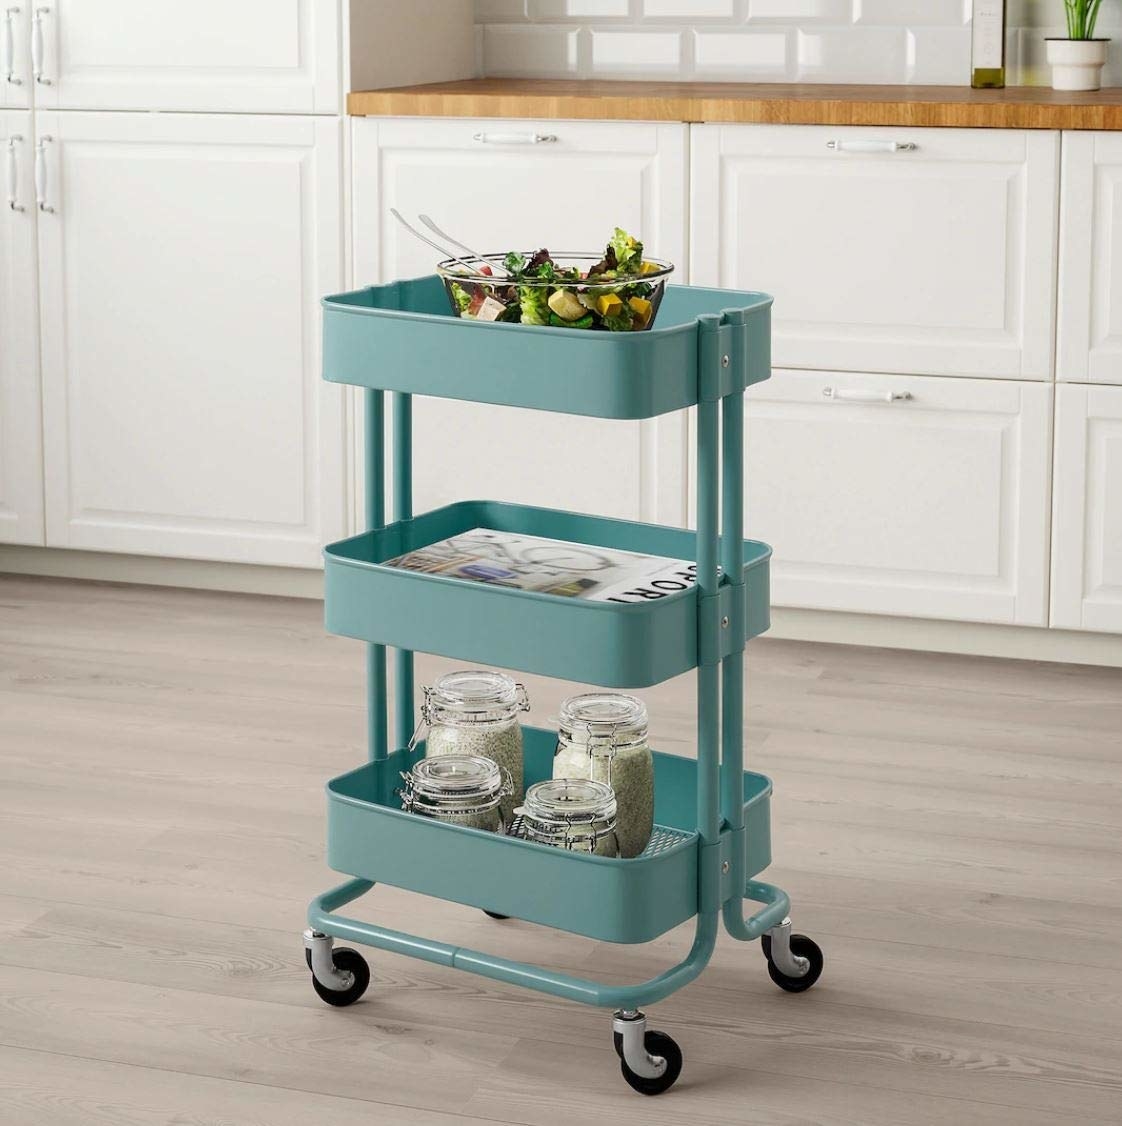 A teal utility cart with pantry products on it